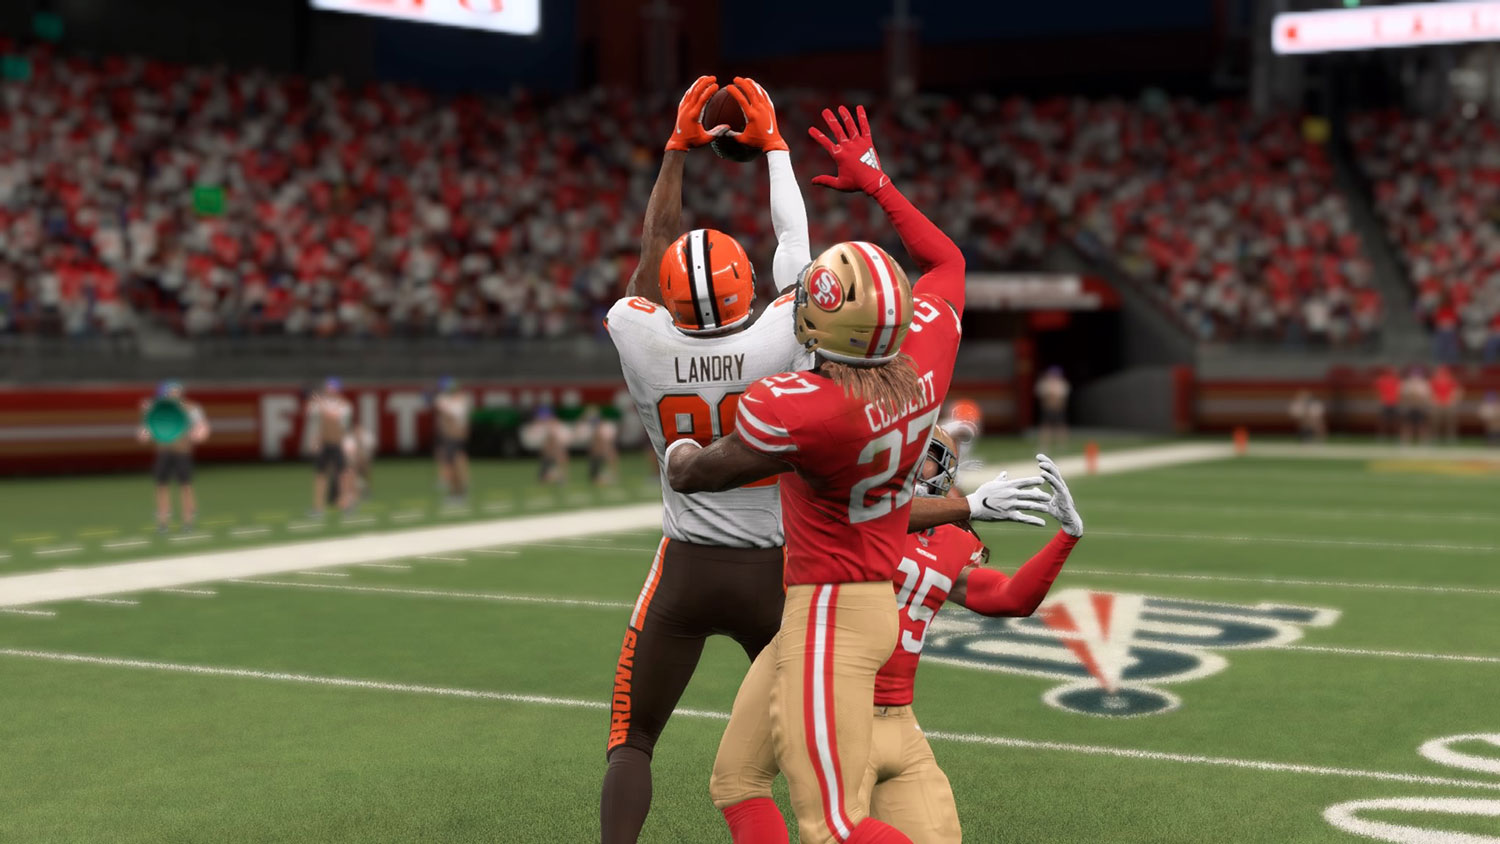 Madden 24 review: The franchise takes another sack - Dexerto